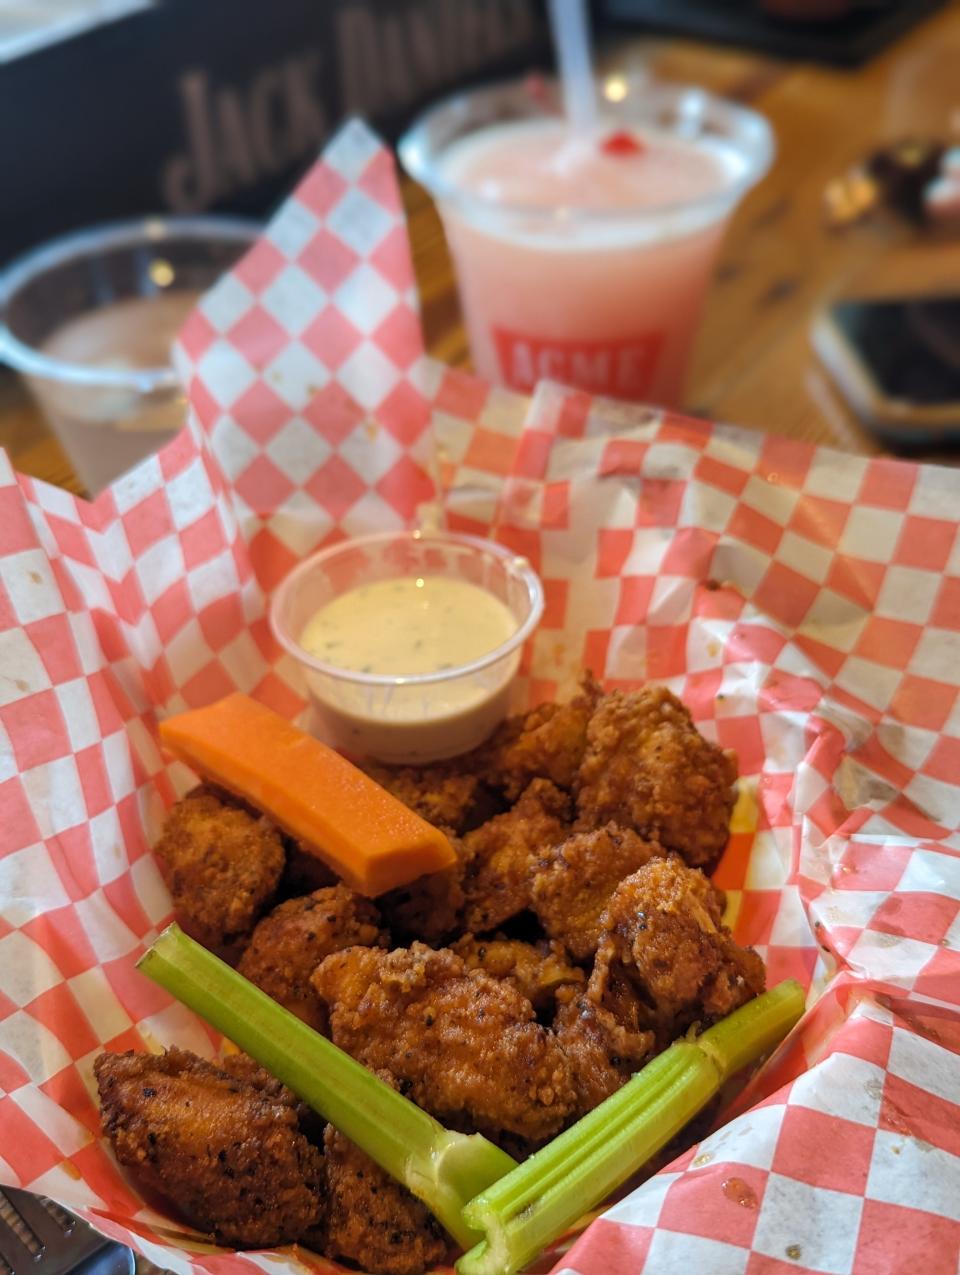 Hot chicken bites and frose at Acme Feed and Seed.